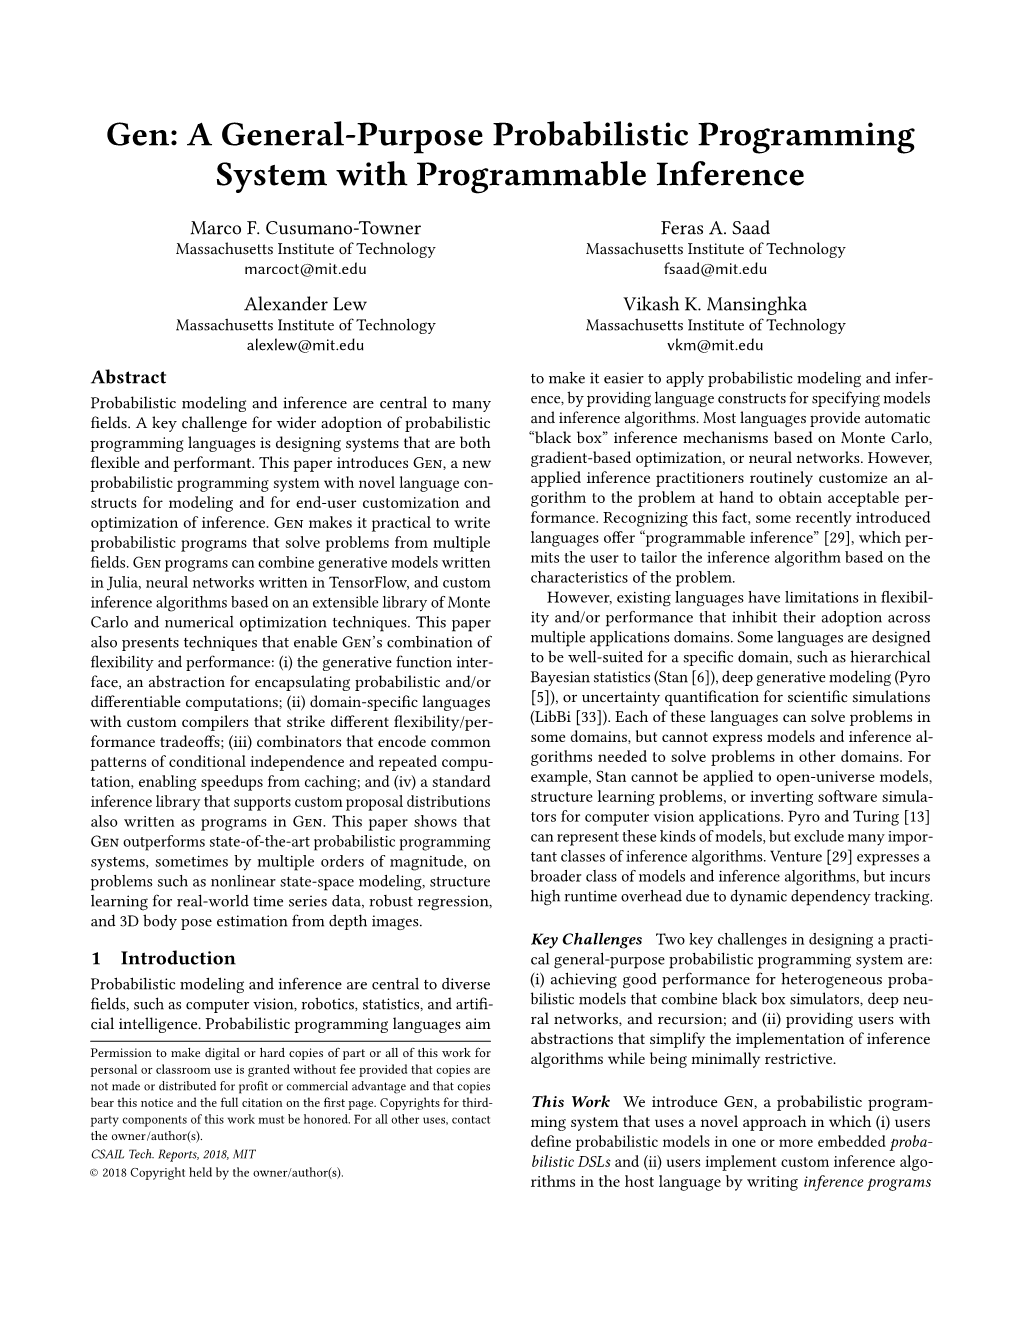 Gen: a General-Purpose Probabilistic Programming System with Programmable Inference